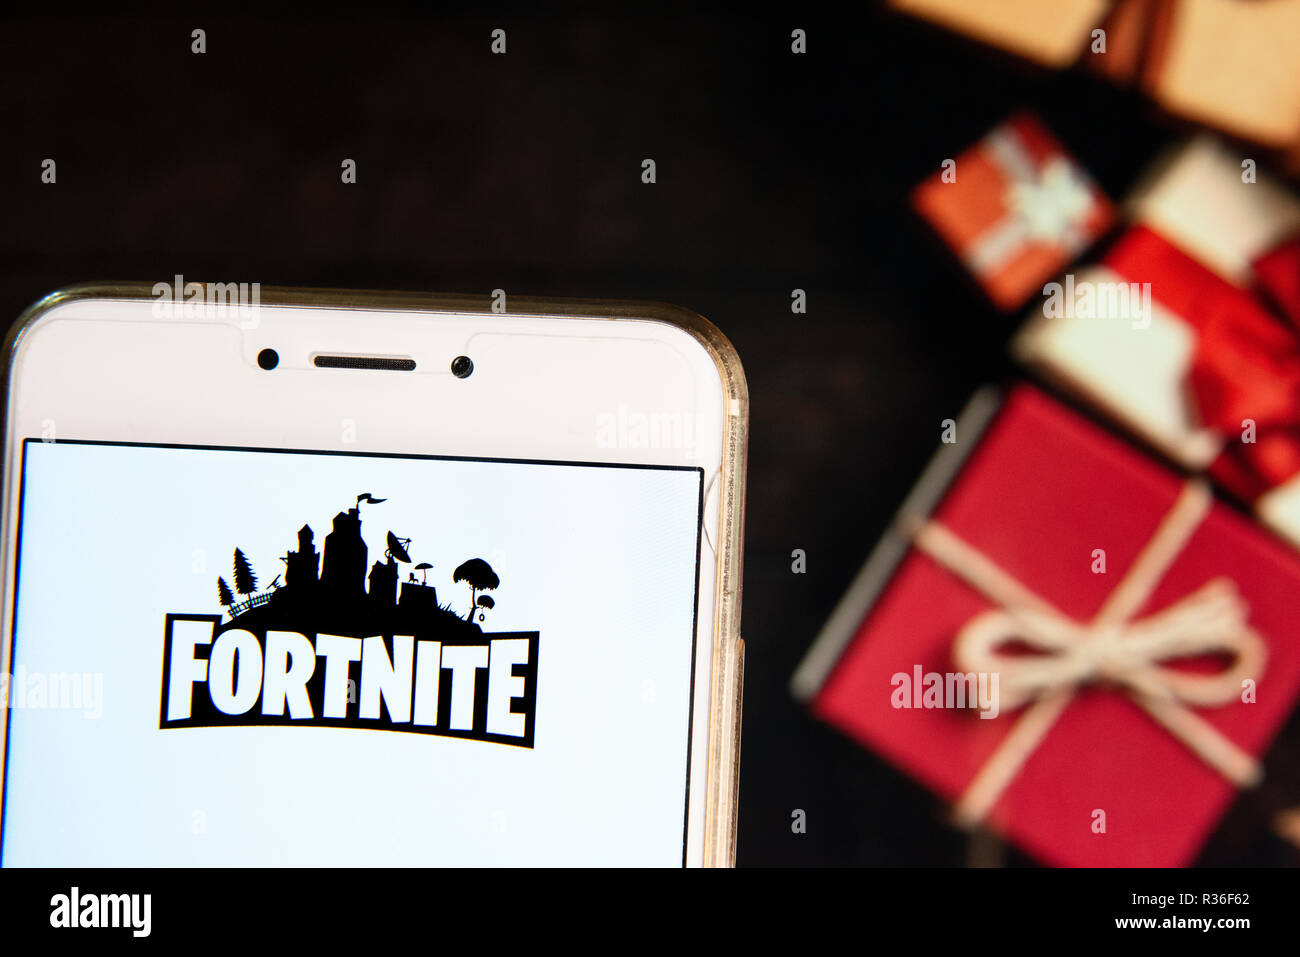 online video game by epic games company fortnite logo is seen on an android mobile device with a christmas wrapped gifts in the background - fortnite homepage android